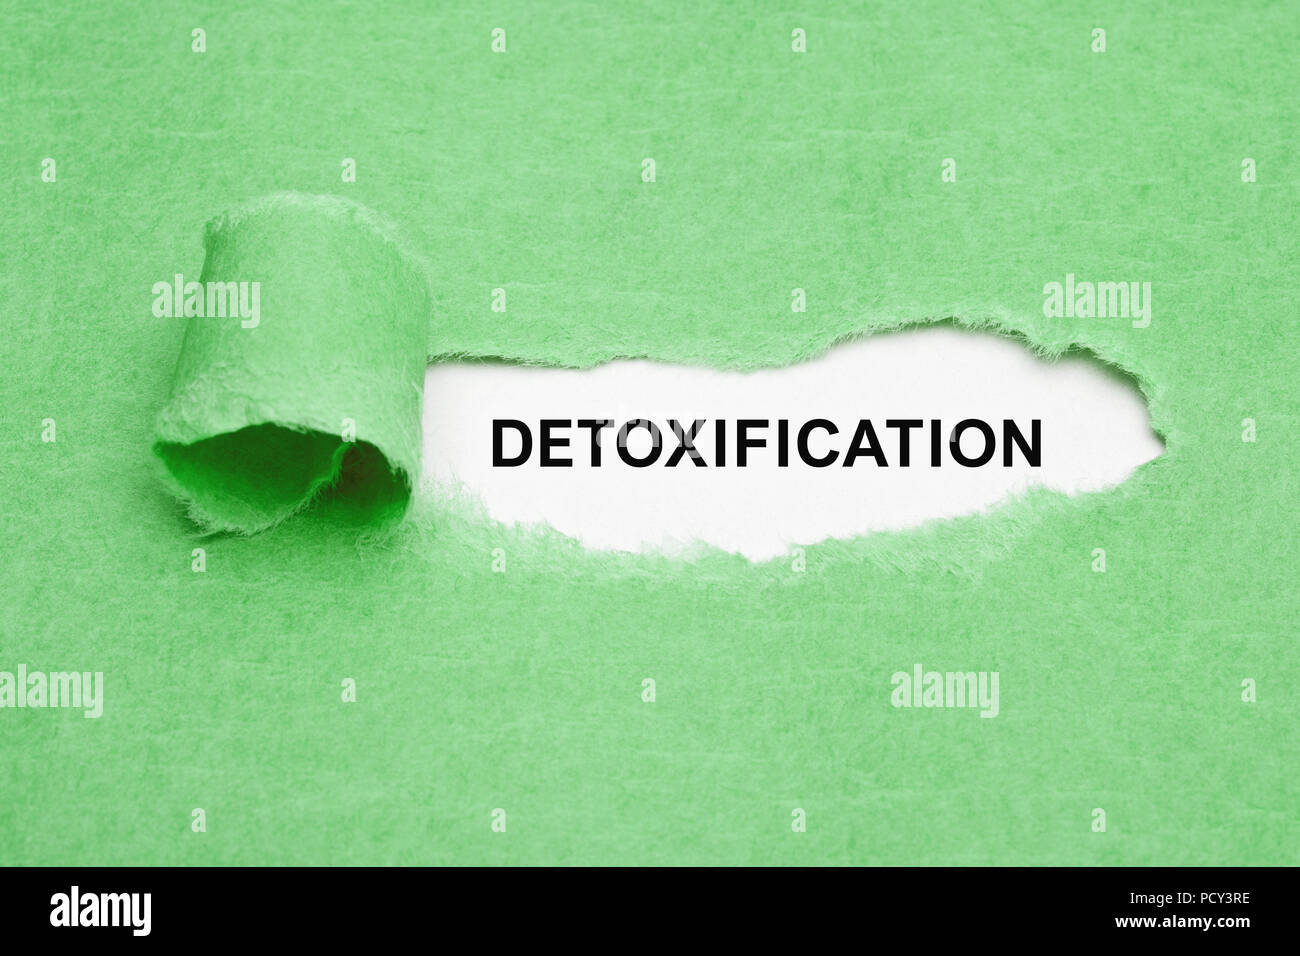 The word Detoxification appearing behind ripped green paper. Stock Photo